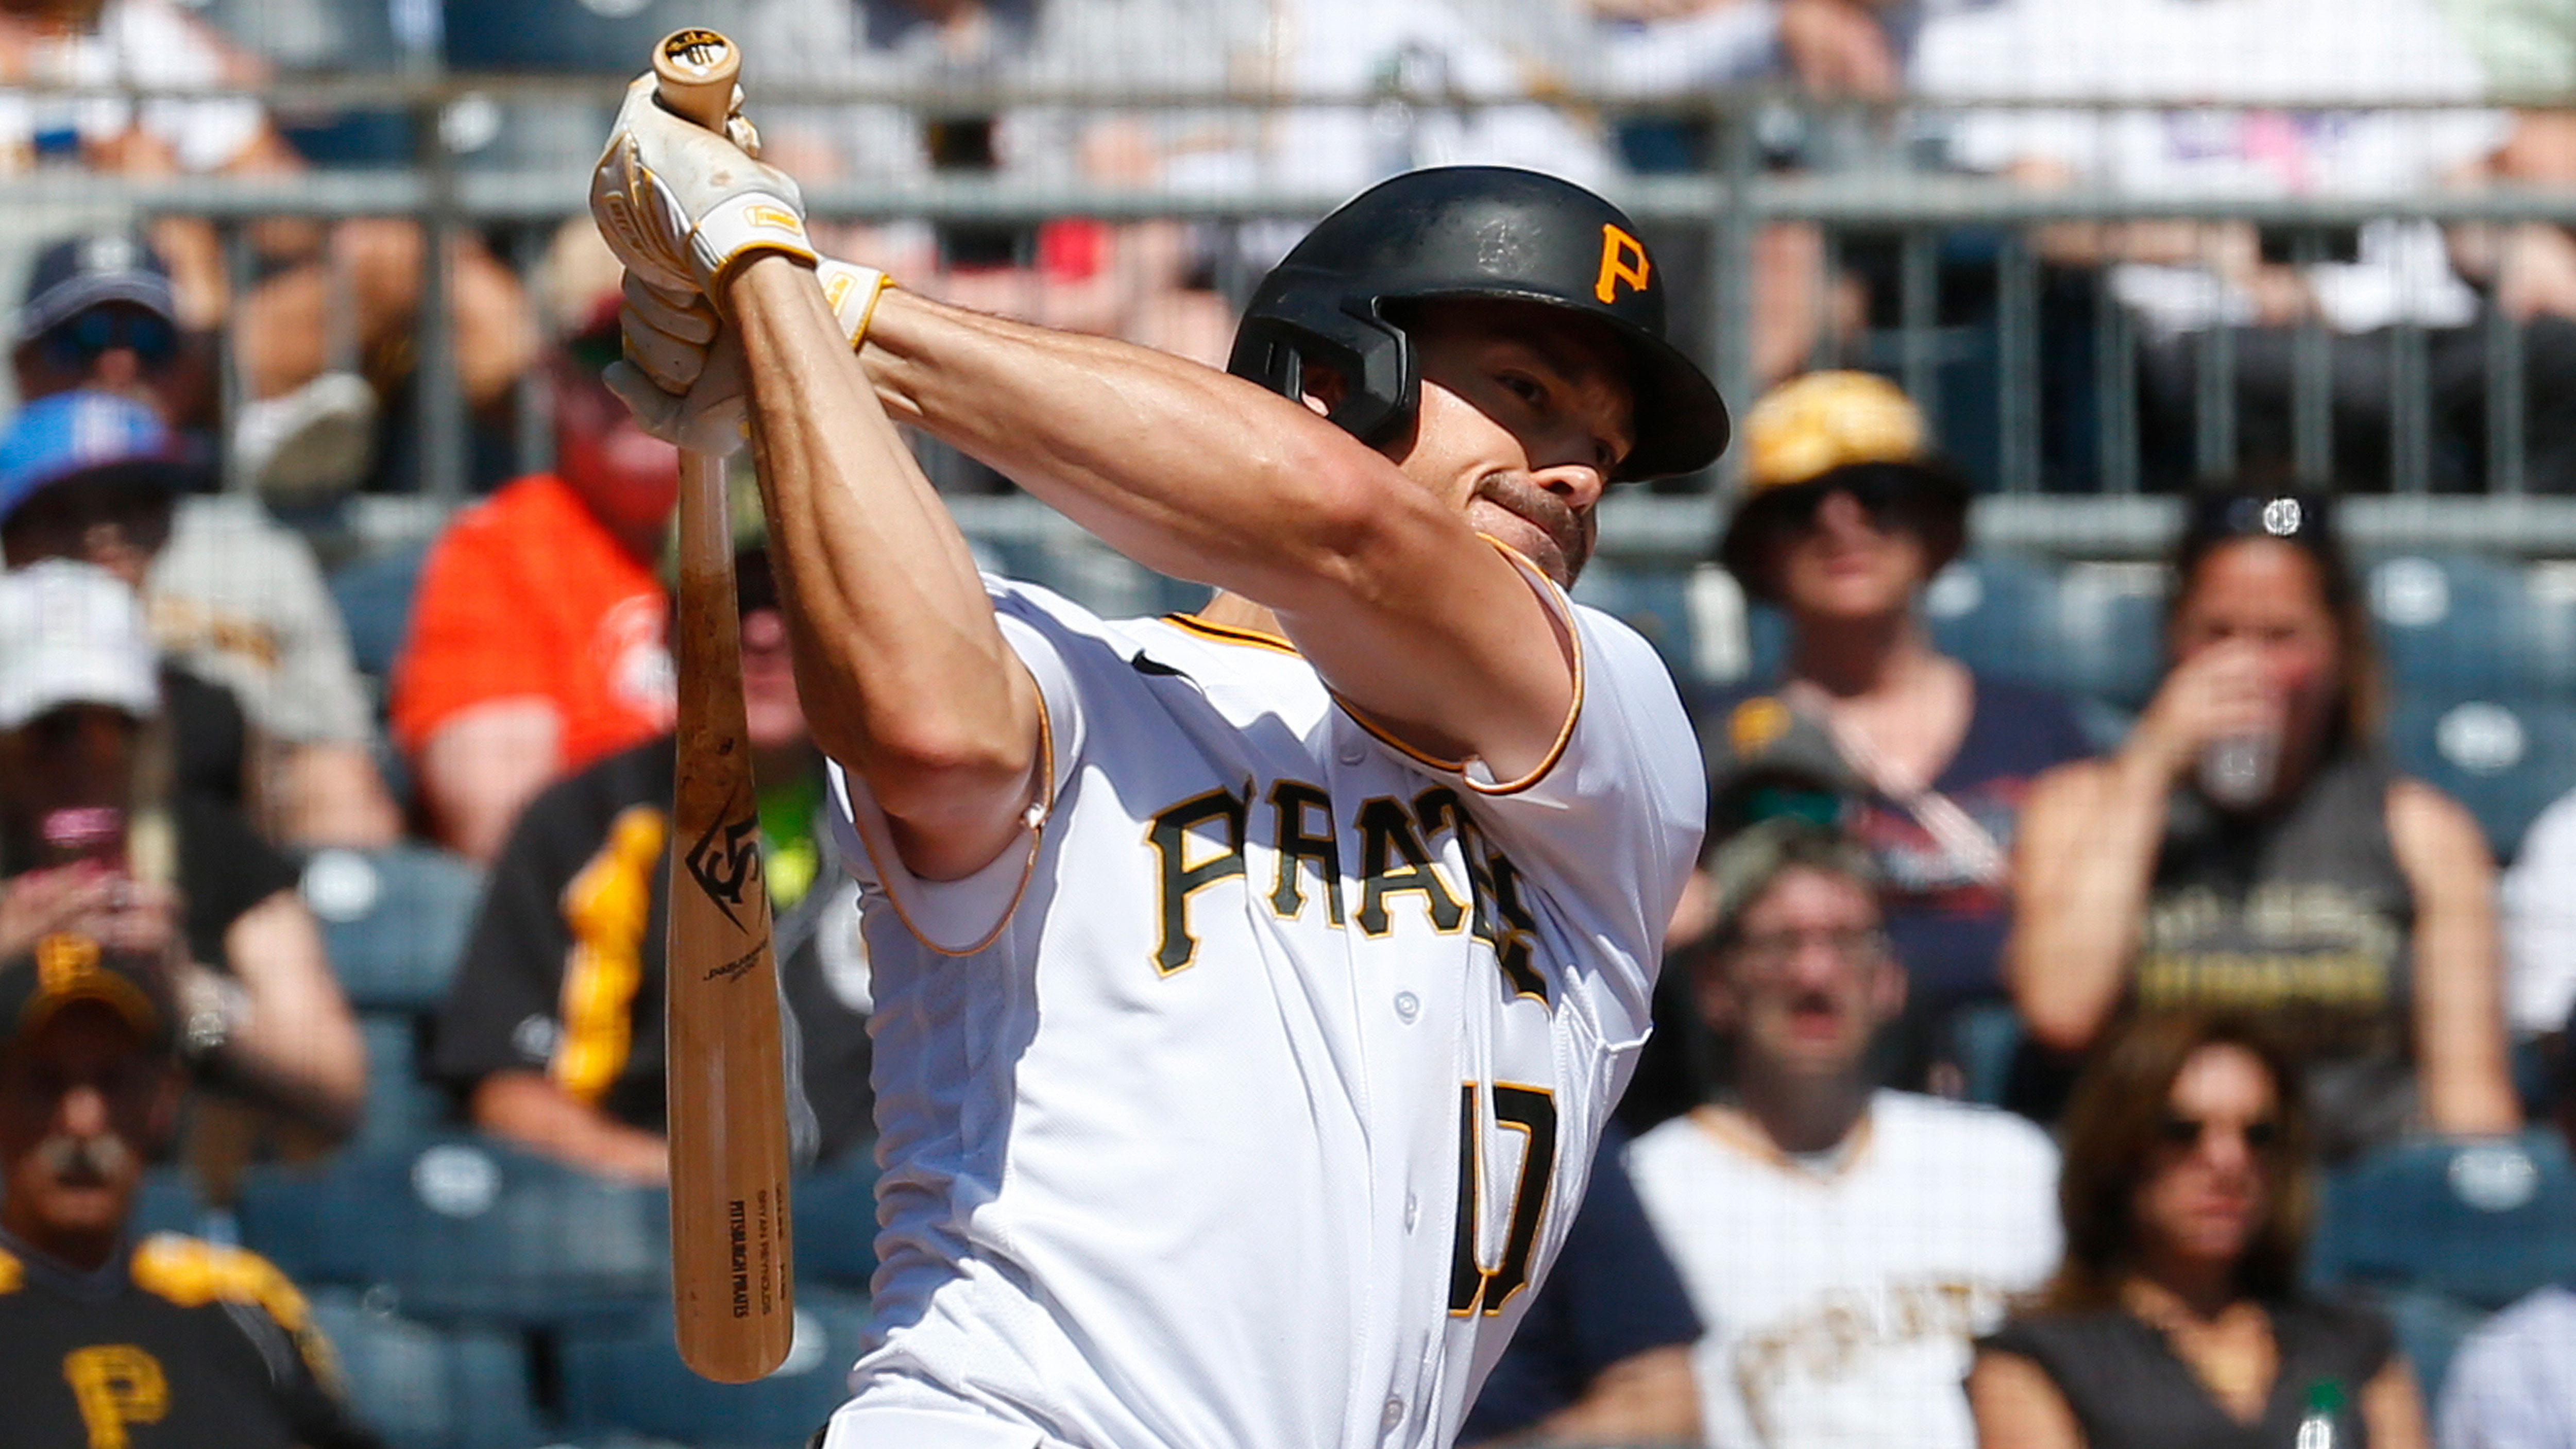 Report: Pirates give outfielder Bryan Reynolds largest contract in